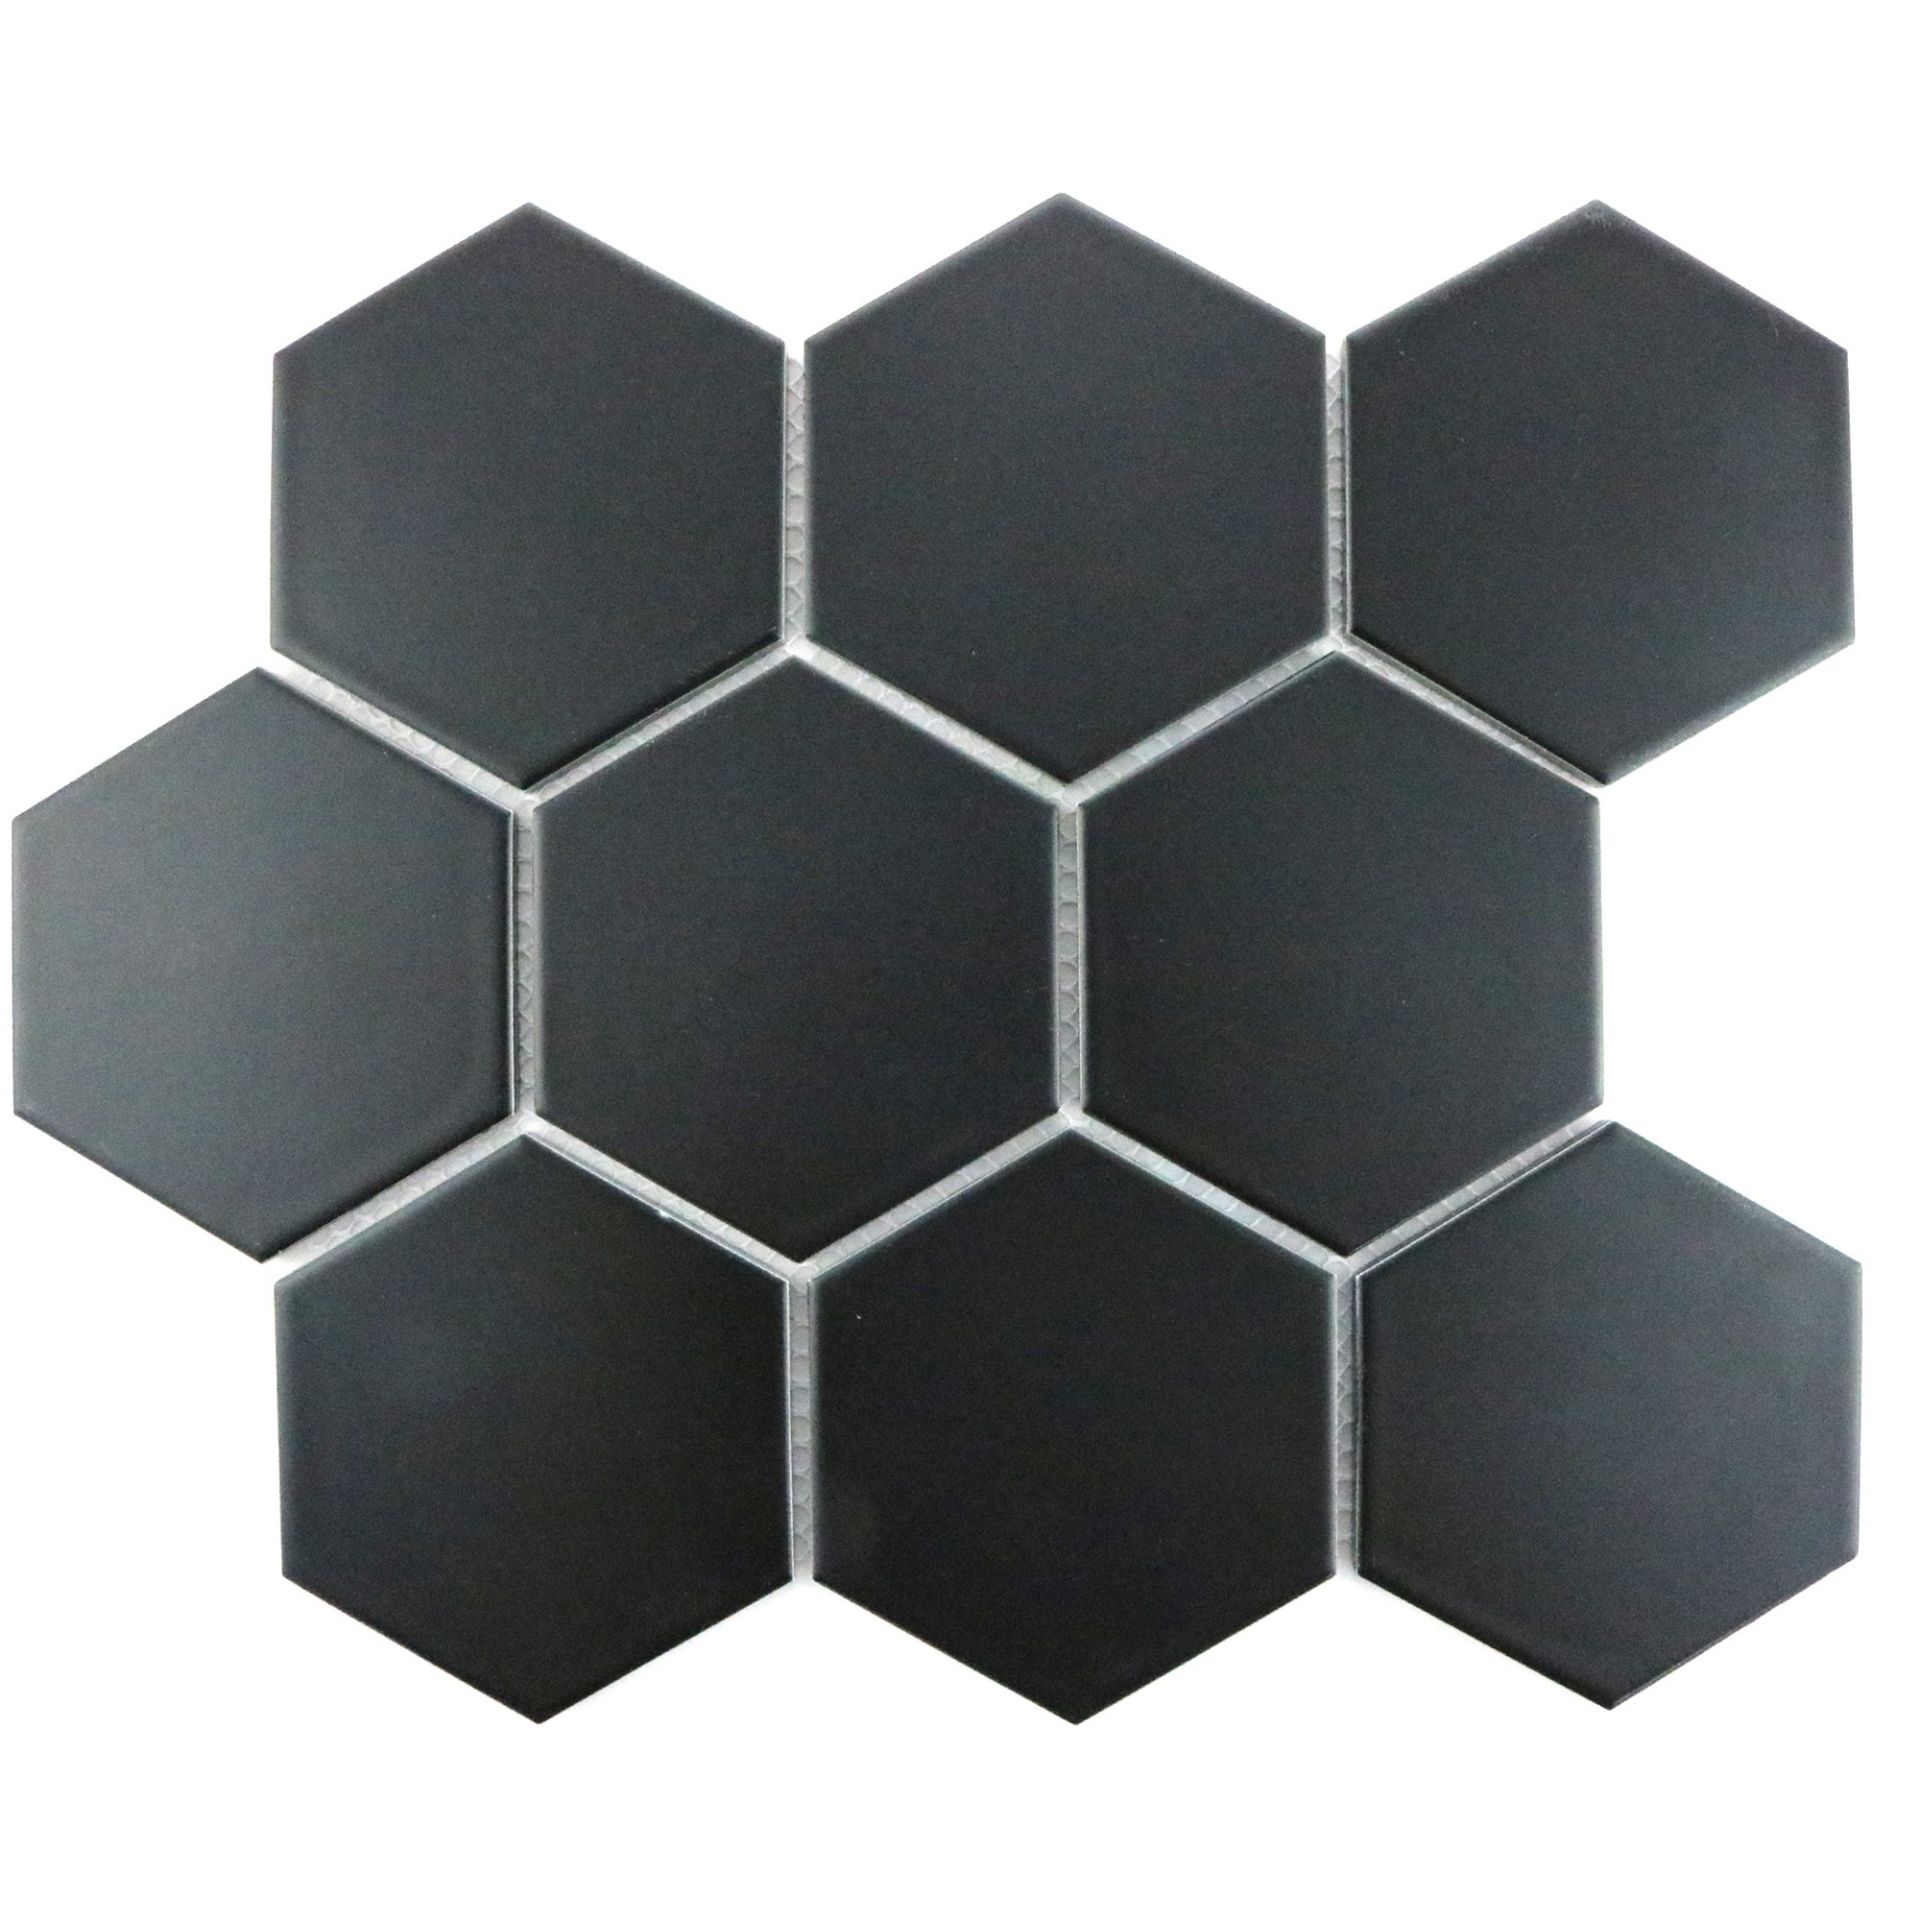 NEW 3m2 150x170mm Hanbury Hexogan Gloss Anthracite Wall Tiles. Rarely do tiles combine beauty ... - Image 2 of 2